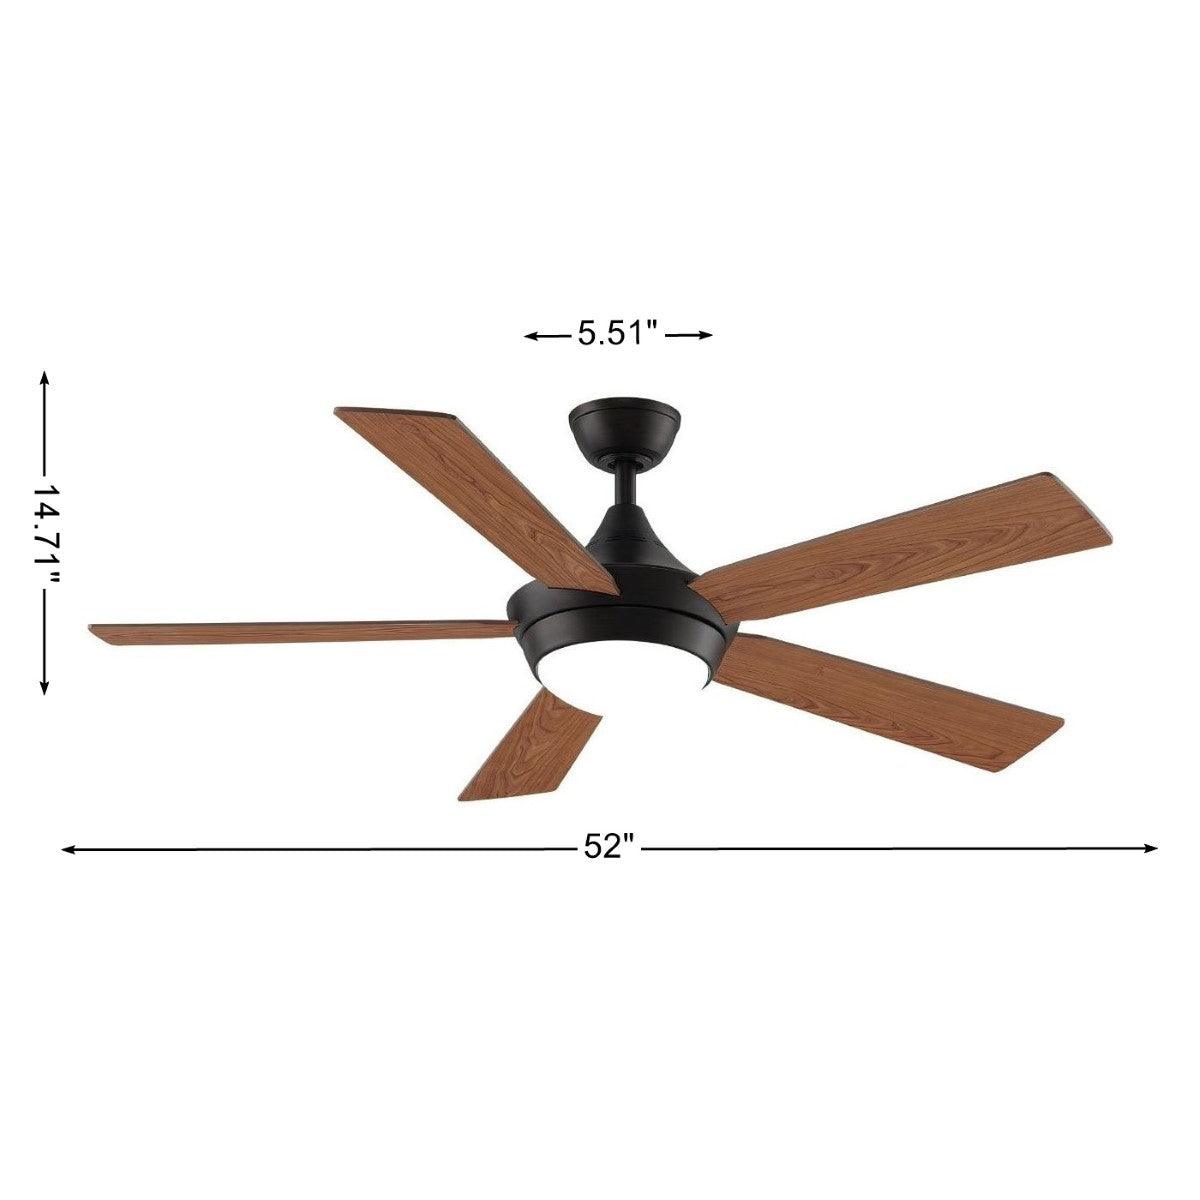 Celano 52 Inch Modern Ceiling Fan With Light And Remote, Opal Frosted Glass